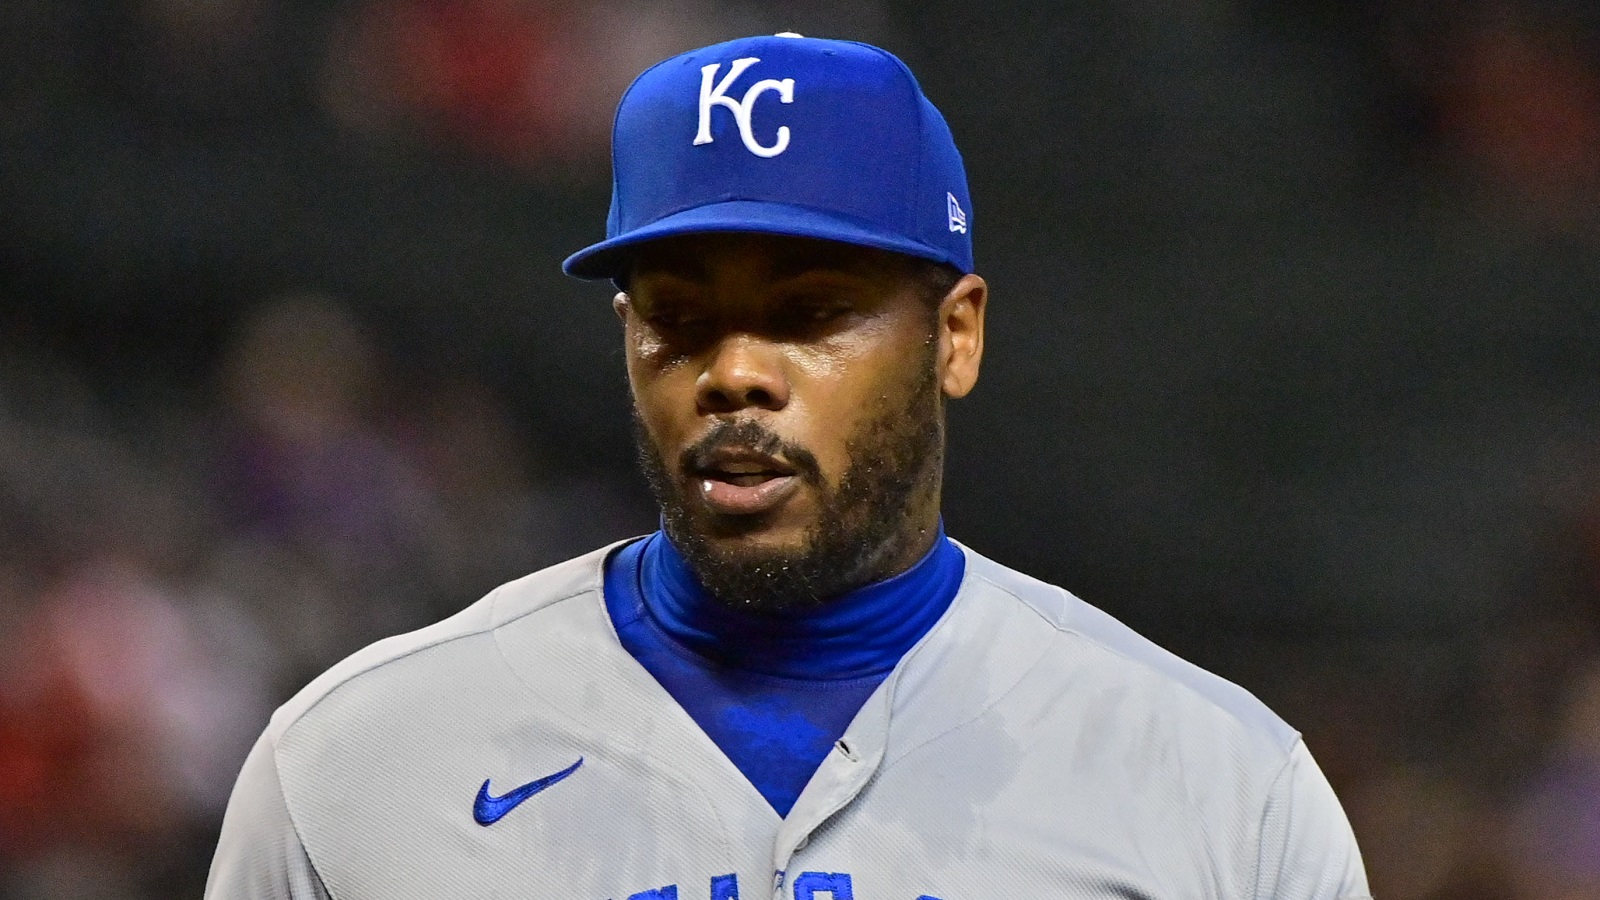 Arolids Chapman agrees to one-year deal with Royals – Trentonian